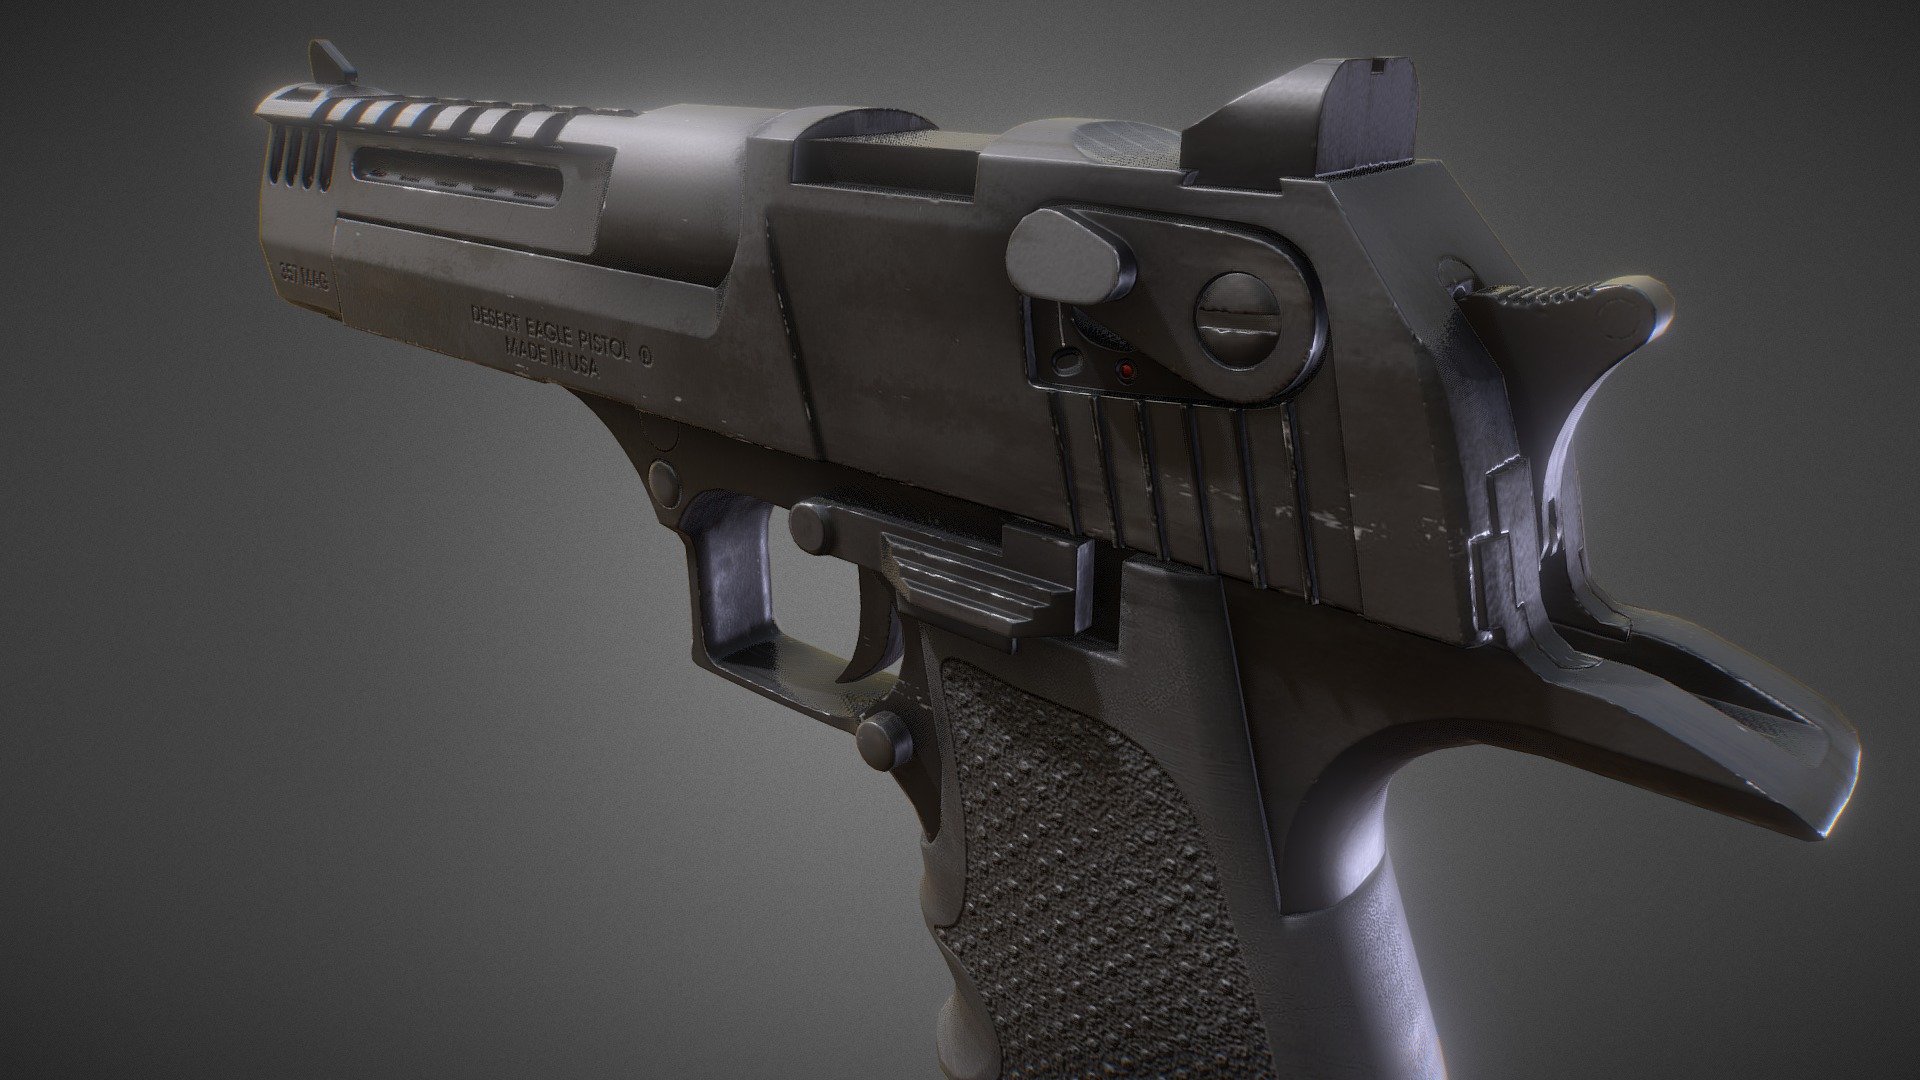 The new aluminum  Desert Eagle L5 with the .357 barrel.
Included in paid model:





Maya ASCII (2018) scene containing high poly, low poly and basic animated version.




FBX files: 







deagle_high.fbx : high poly (without smooth). Can be imported into other 3d programs that support creases or hard edges/smoothing groups can be used as bevels/creases.




deagle_low.fbx : low poly with smoothing groups, low poly with basic animation seen in Sketchfab scene.




deagle_anim.fbx:  low poly with smoothing groups and basic animation




deagle.fbx: bake file loaded in Toolbag, contains low and collapsed high separated and exploded.







deagle.tbscene: Marmoset Toolbag 3 scene used for baking.




deagle.spp: Substance Painter file.  The file can is organized and named. can be used for saving various textures with different colors and wear levels can be easily saved.




glTF directory with glTF model/PBR textures from Painter.


 - Desert Eagle L5 .357 - Buy Royalty Free 3D model by Valentin N (@vrntech) 3d model